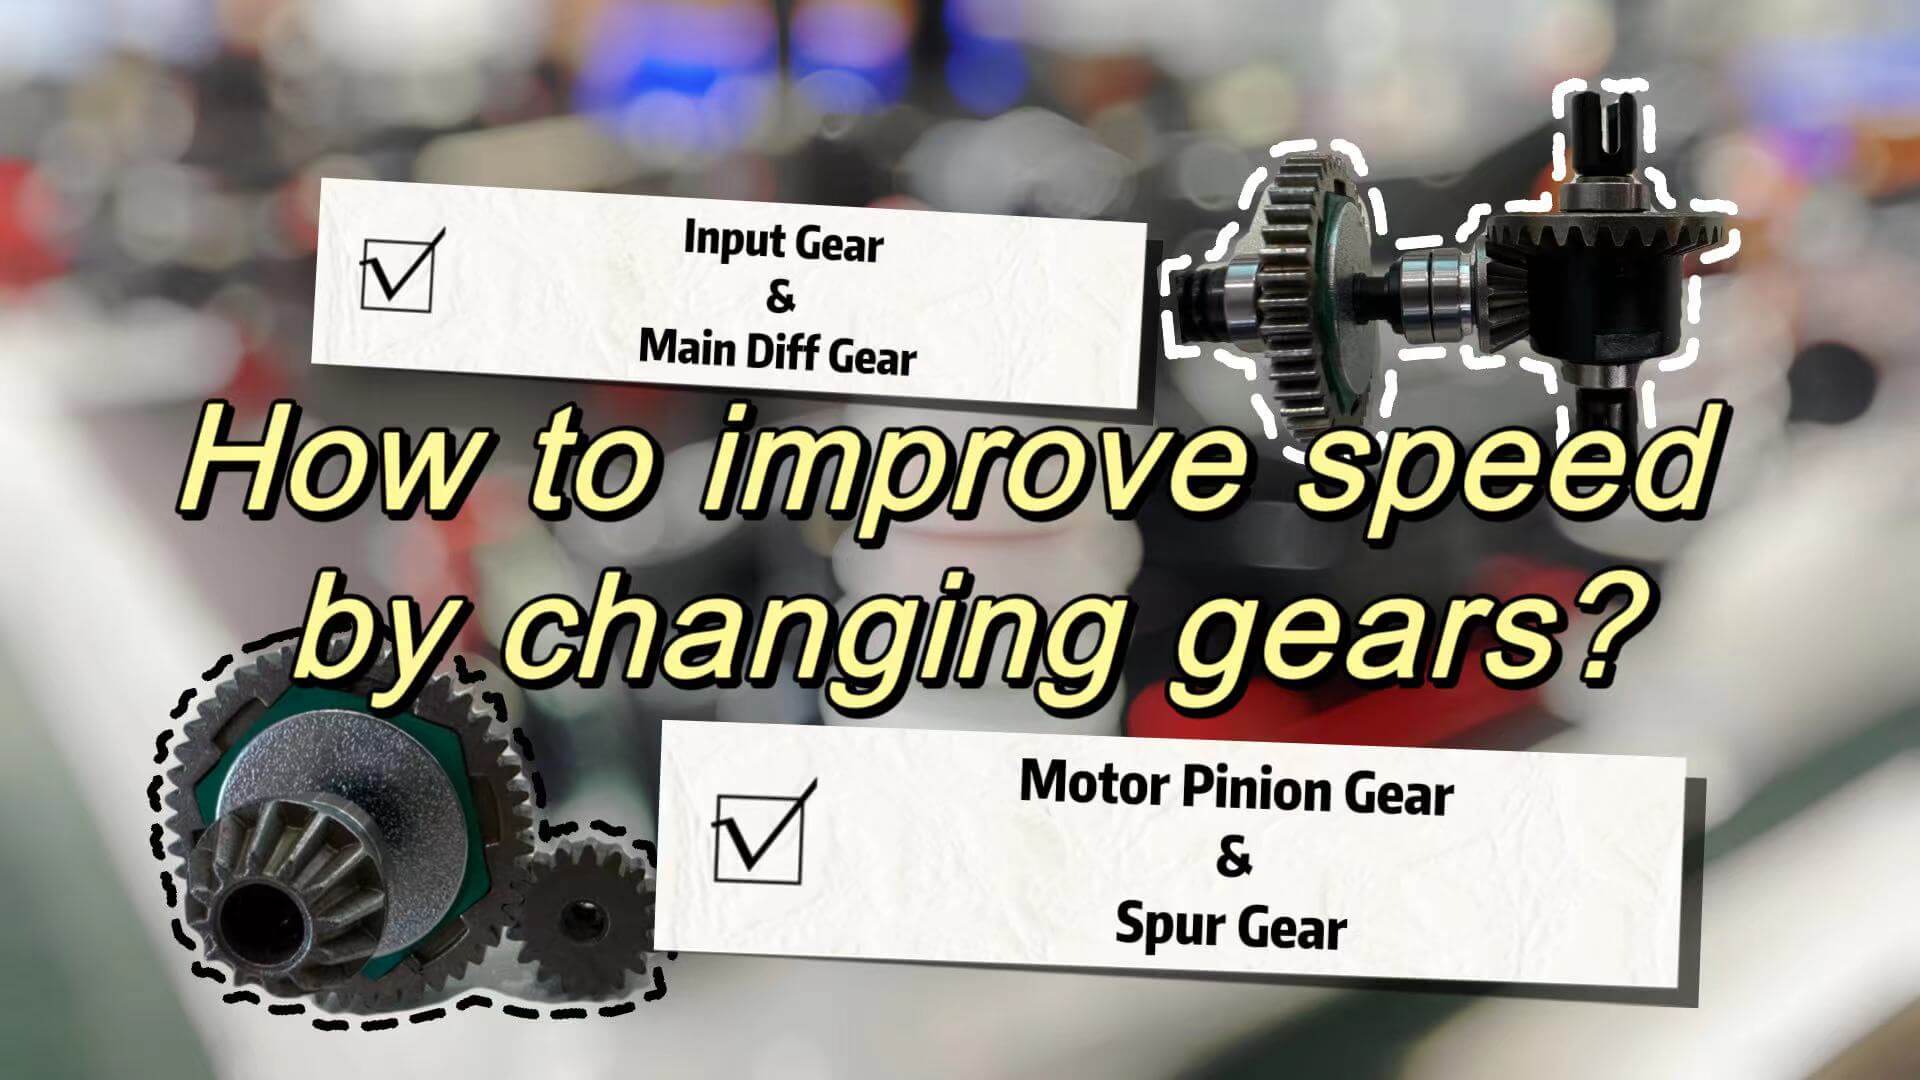 How to improve speed by changing gears?